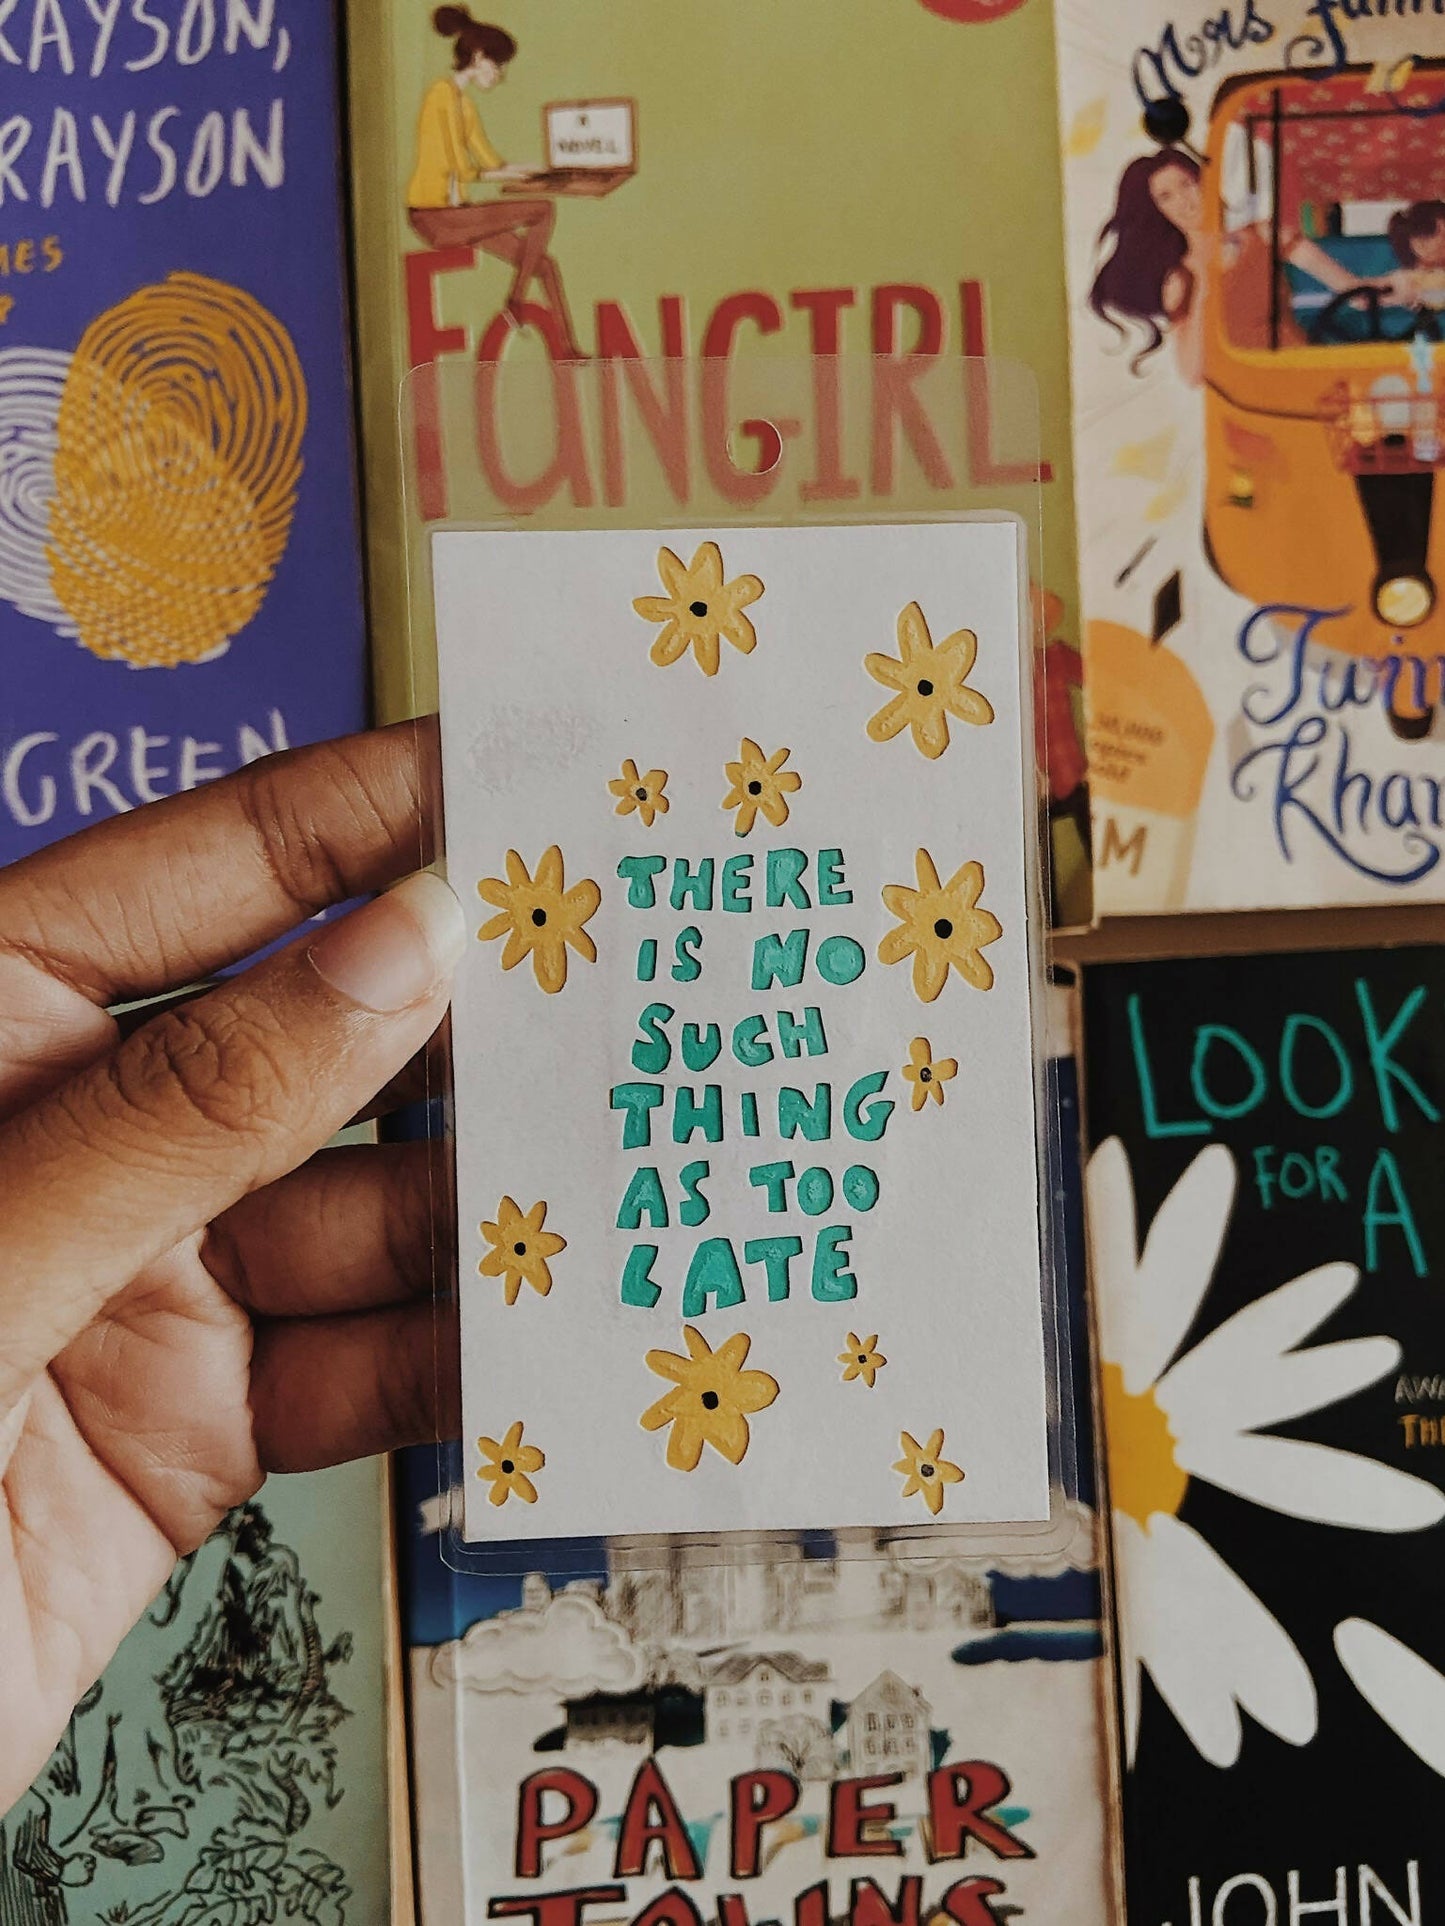 Positive Quotes Paper Cutting Bookmark | Personalised Design, Photo and Size available | Paper Cut Art| Gifts with Purpose | Book Lovers | Sapiosexual | Bookmarks | Positive Vibes | Happy Life